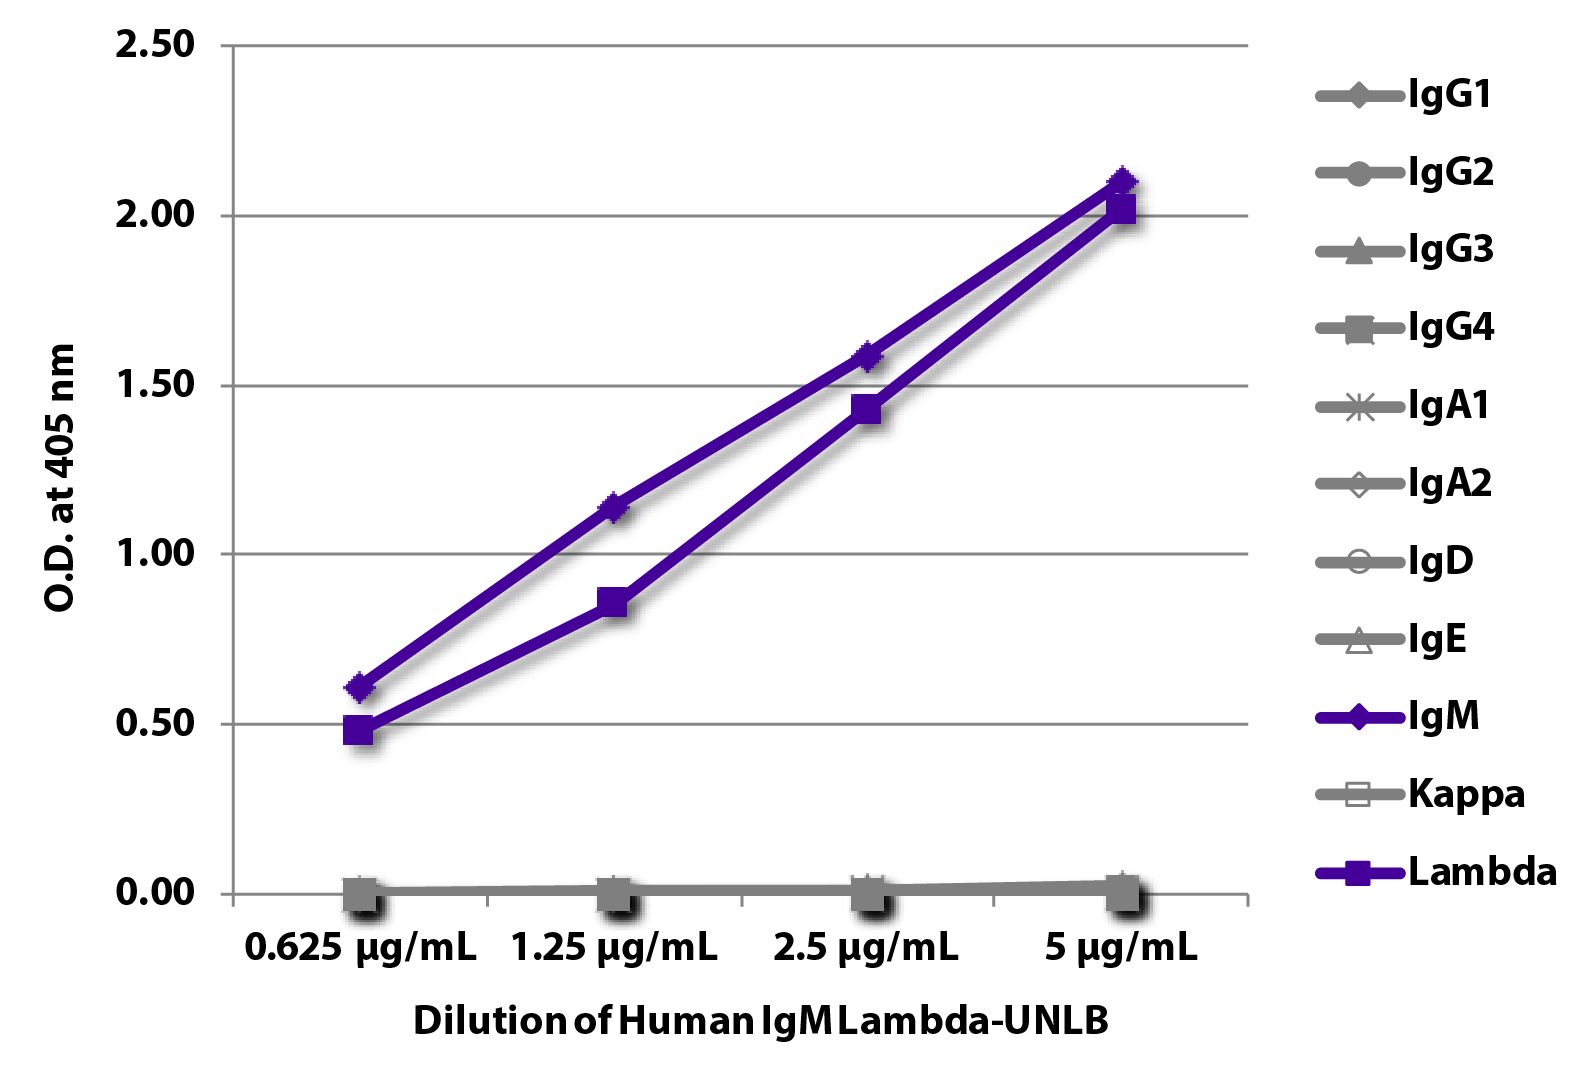 ELISA plate was coated with serially diluted Human IgM Lambda-UNLB (SB Cat. No. 0158L-01).  Immunoglobulin was detected with Mouse Anti-Human IgG<sub>1</sub> Hinge-BIOT (SB Cat. No. 9052-08), Mouse Anti-Human IgG<sub>2</sub> Fc-BIOT (SB Cat. No. 9060-08), Mouse Anti-Human IgG<sub>3</sub> Hinge-BIOT (SB Cat. No. 9210-08), Mouse Anti-Human IgG<sub>4</sub> pFc'-BIOT (SB Cat. No. 9190-08), Mouse Anti-Human IgA<sub>1</sub>-BIOT (SB Cat. No. 9130-08), Mouse Anti-Human IgA<sub>2</sub>-BIOT (SB Cat. No. 9140-08),  Mouse Anti-Human IgD-BIOT (SB Cat. No. 9030-08), Mouse Anti-Human IgE Fc-BIOT (SB Cat. No. 9160-08), Mouse Anti-Human IgM-BIOT (SB Cat. No. 9020-08), Mouse Anti-Human Kappa-BIOT (SB Cat. No. 9230-08), and Mouse Anti-Human Lambda-BIOT (SB Cat. No. 9180-08) followed by Streptavidin-HRP (SB Cat. No. 7100-05) and quantified.